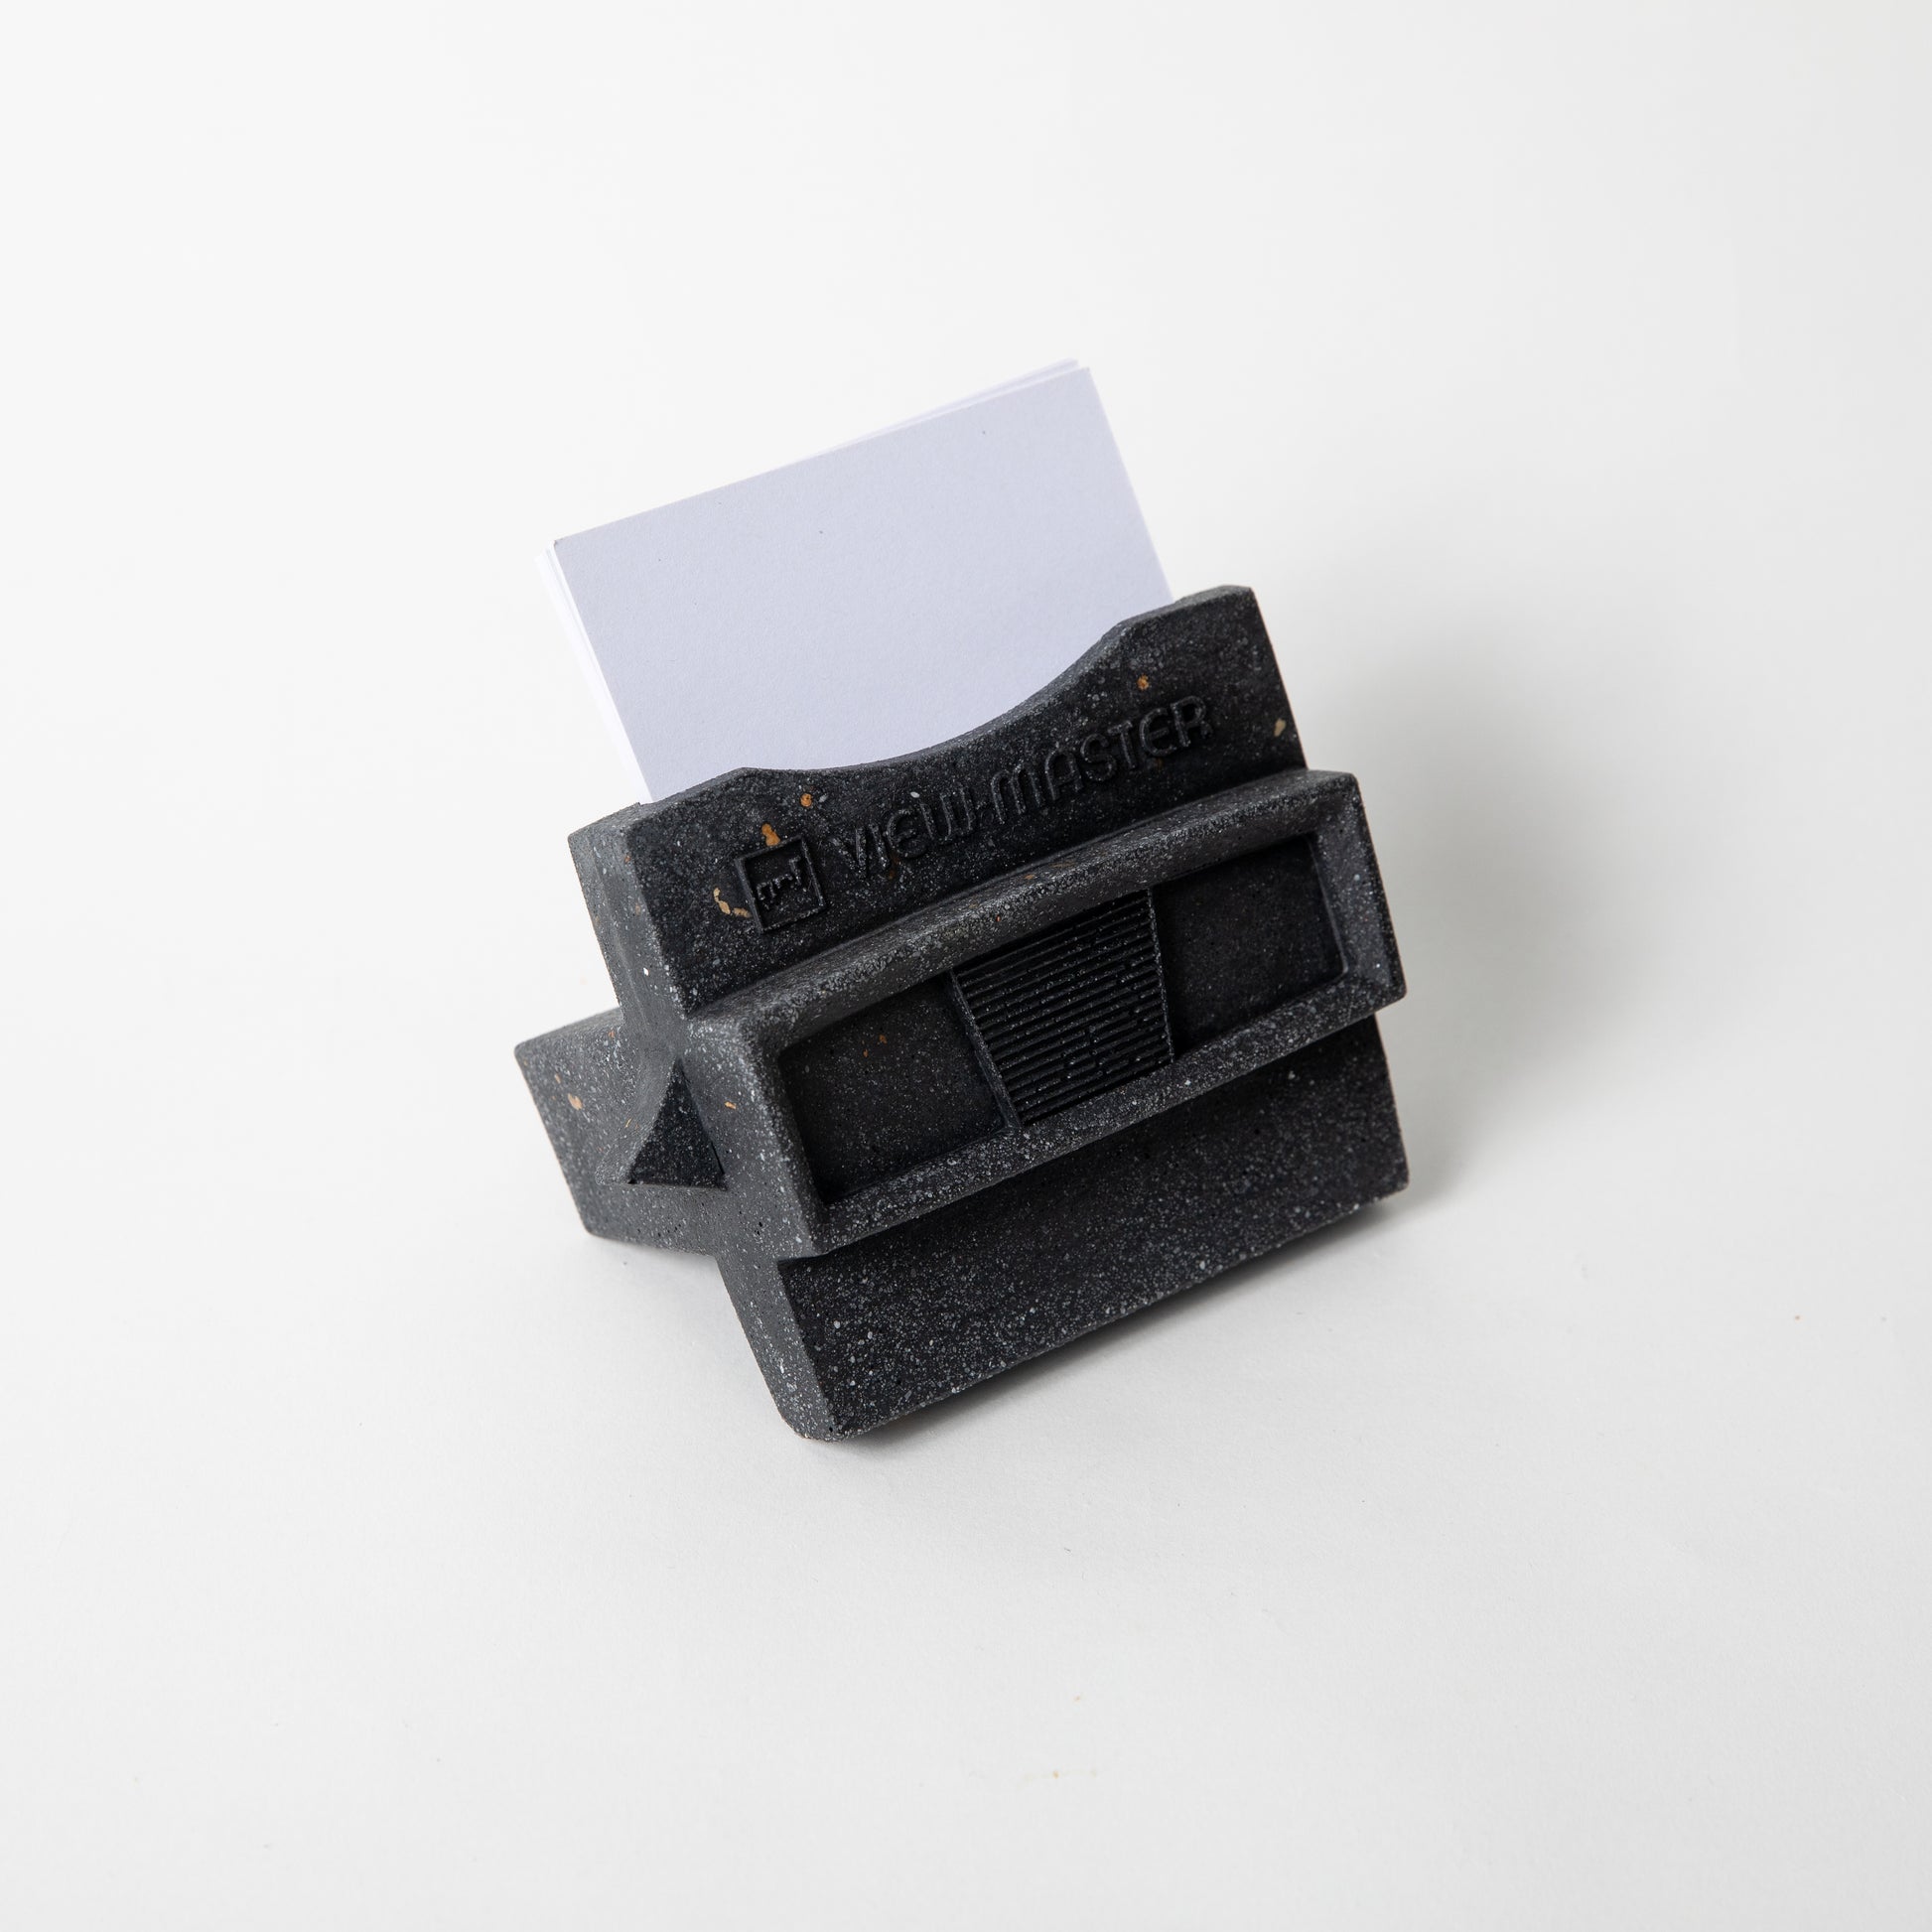 The Retro Business Card Holder in Black Terrazzo w/ blank business cards placed inside.